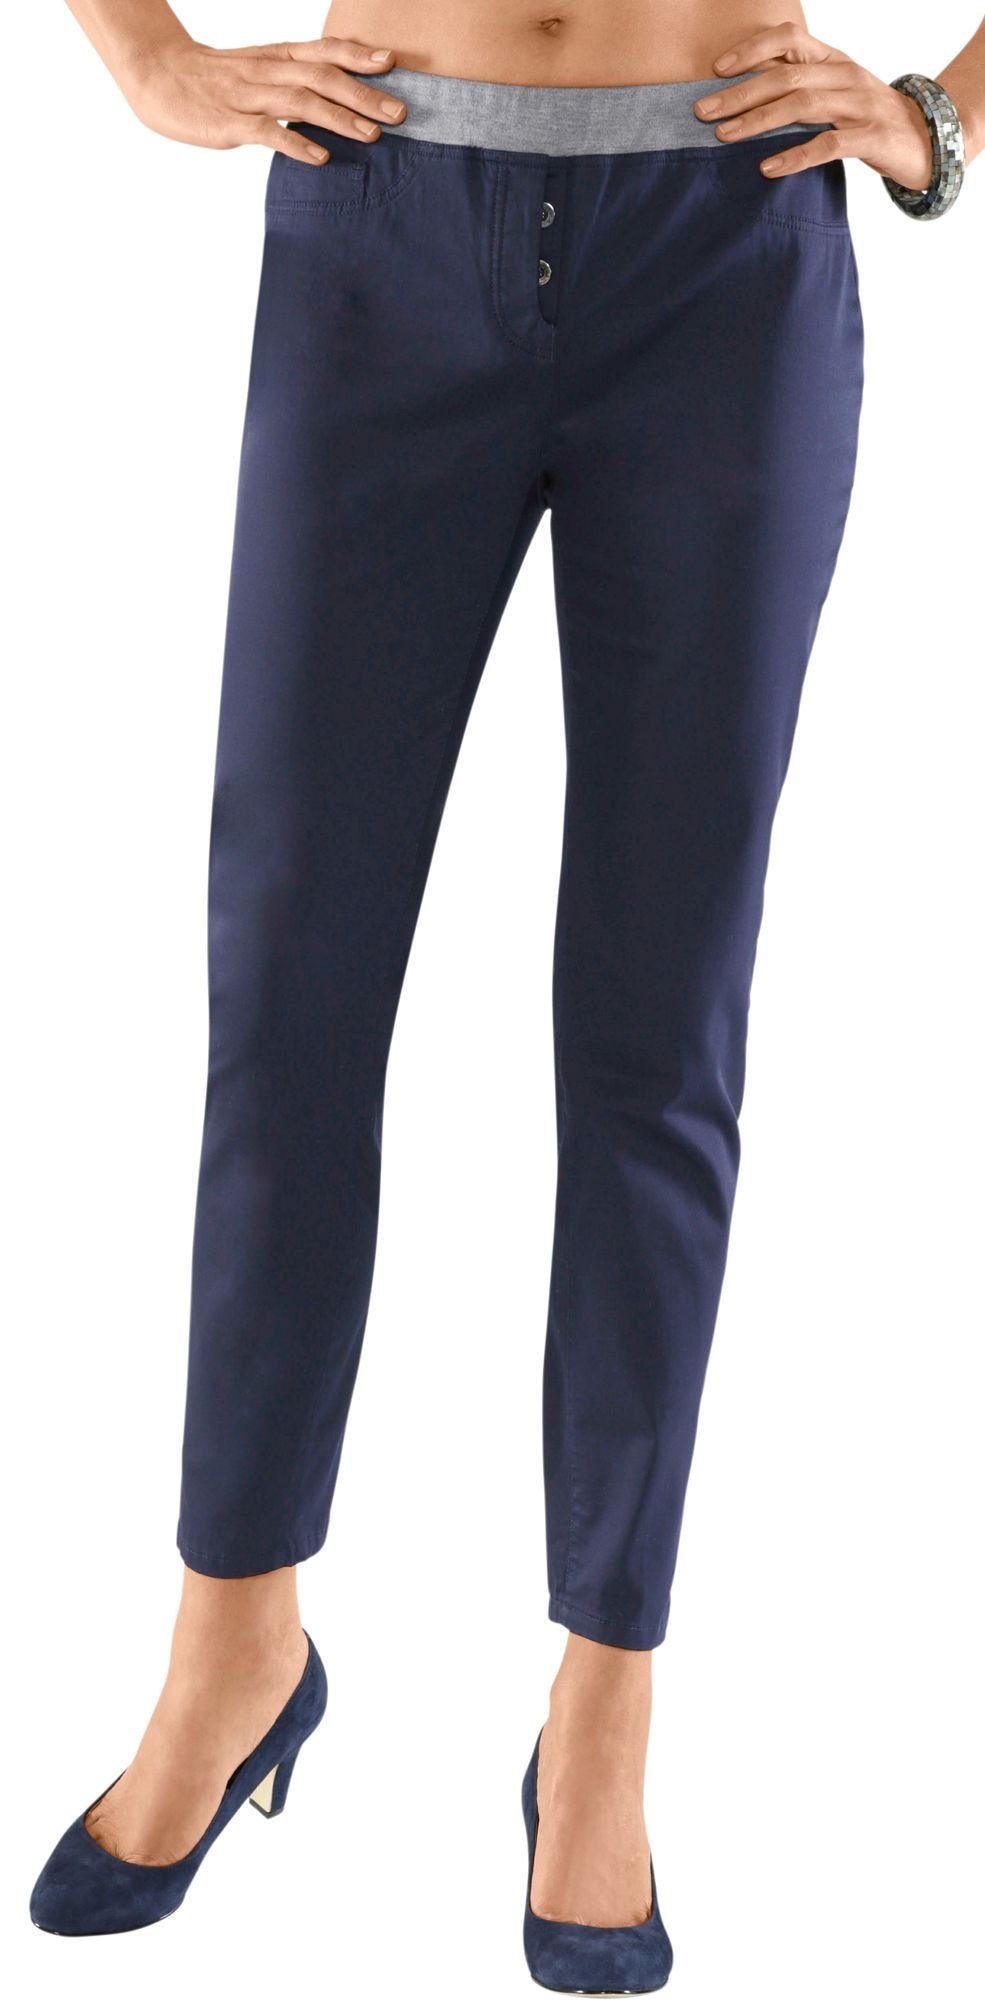 Otto - Collection L. NU 15% KORTING: Collection L. 7/8-broek van zachte jersey